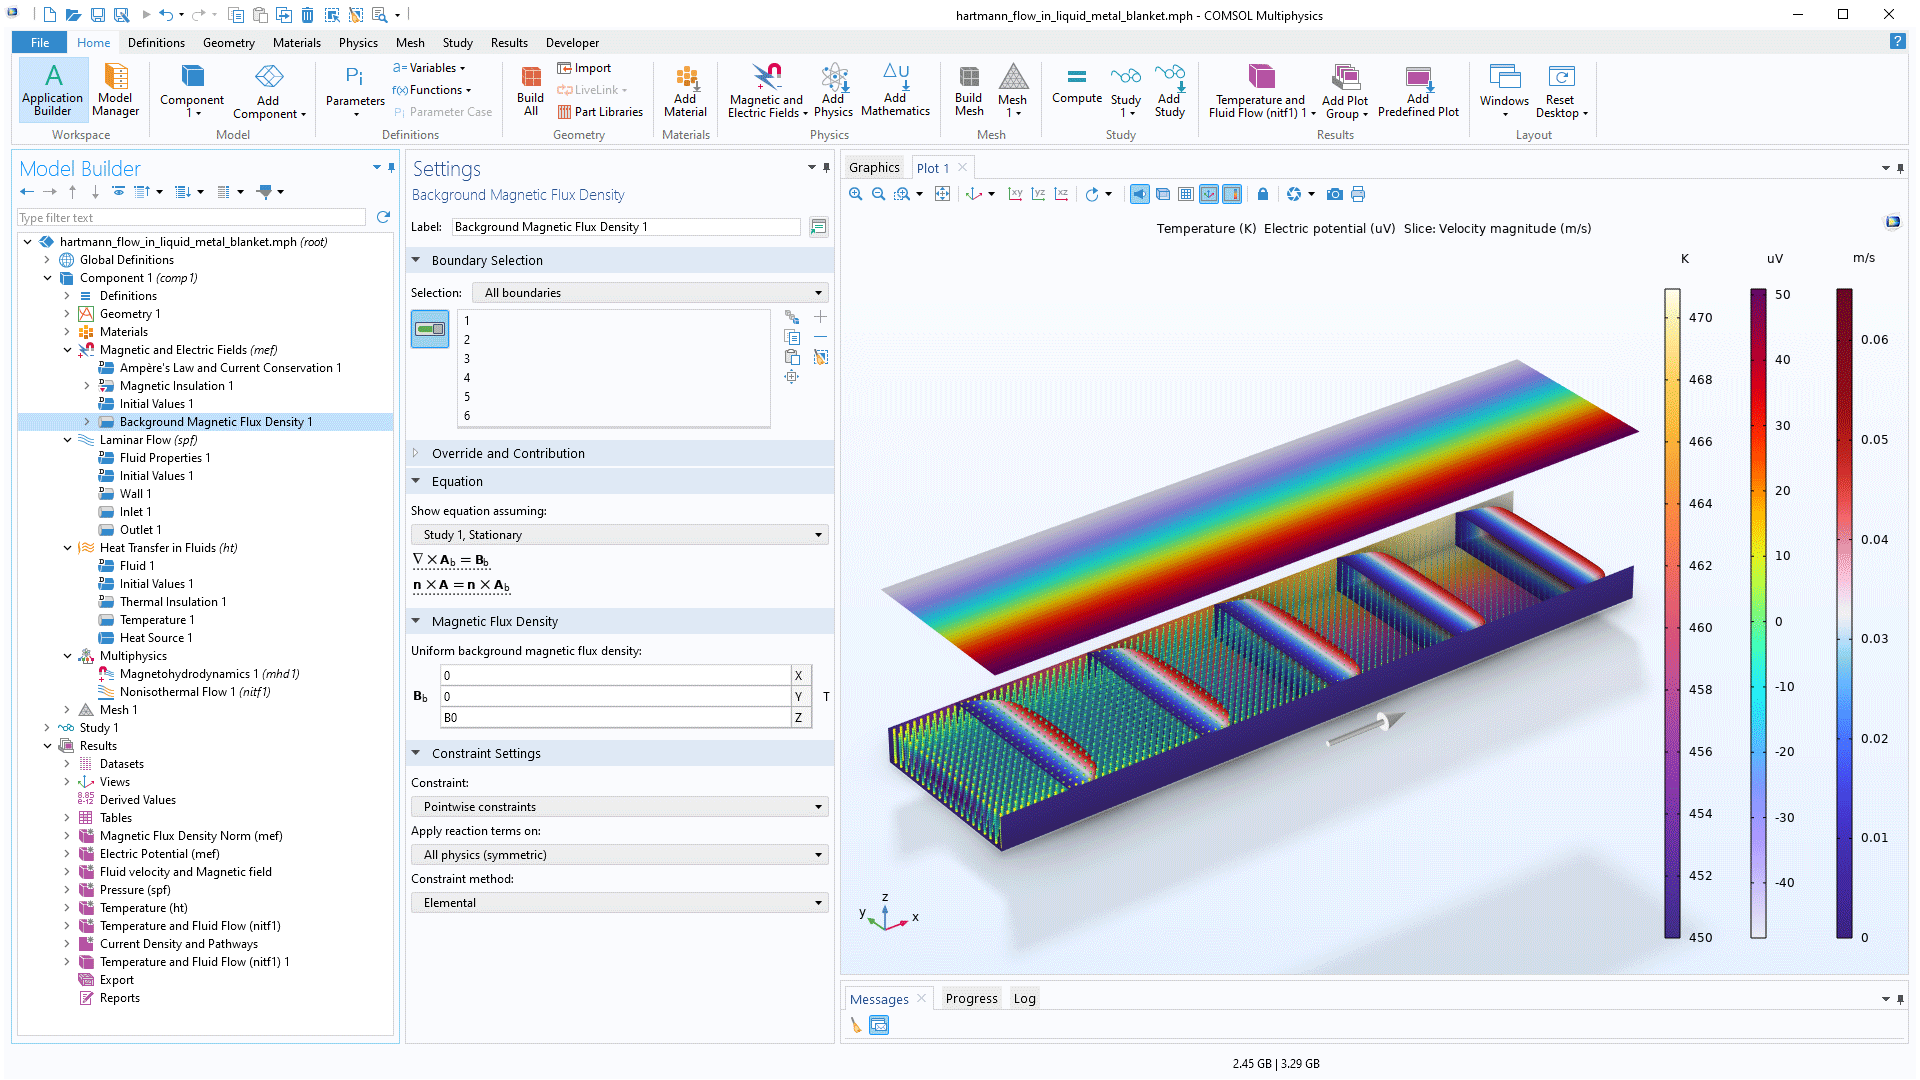 The COMSOL Multiphysics UI showing the Model Builder with the Background Magnetic Flux Density node highlighted, the corresponding Settings window, and a liquid metal blanket model in the Graphics window.